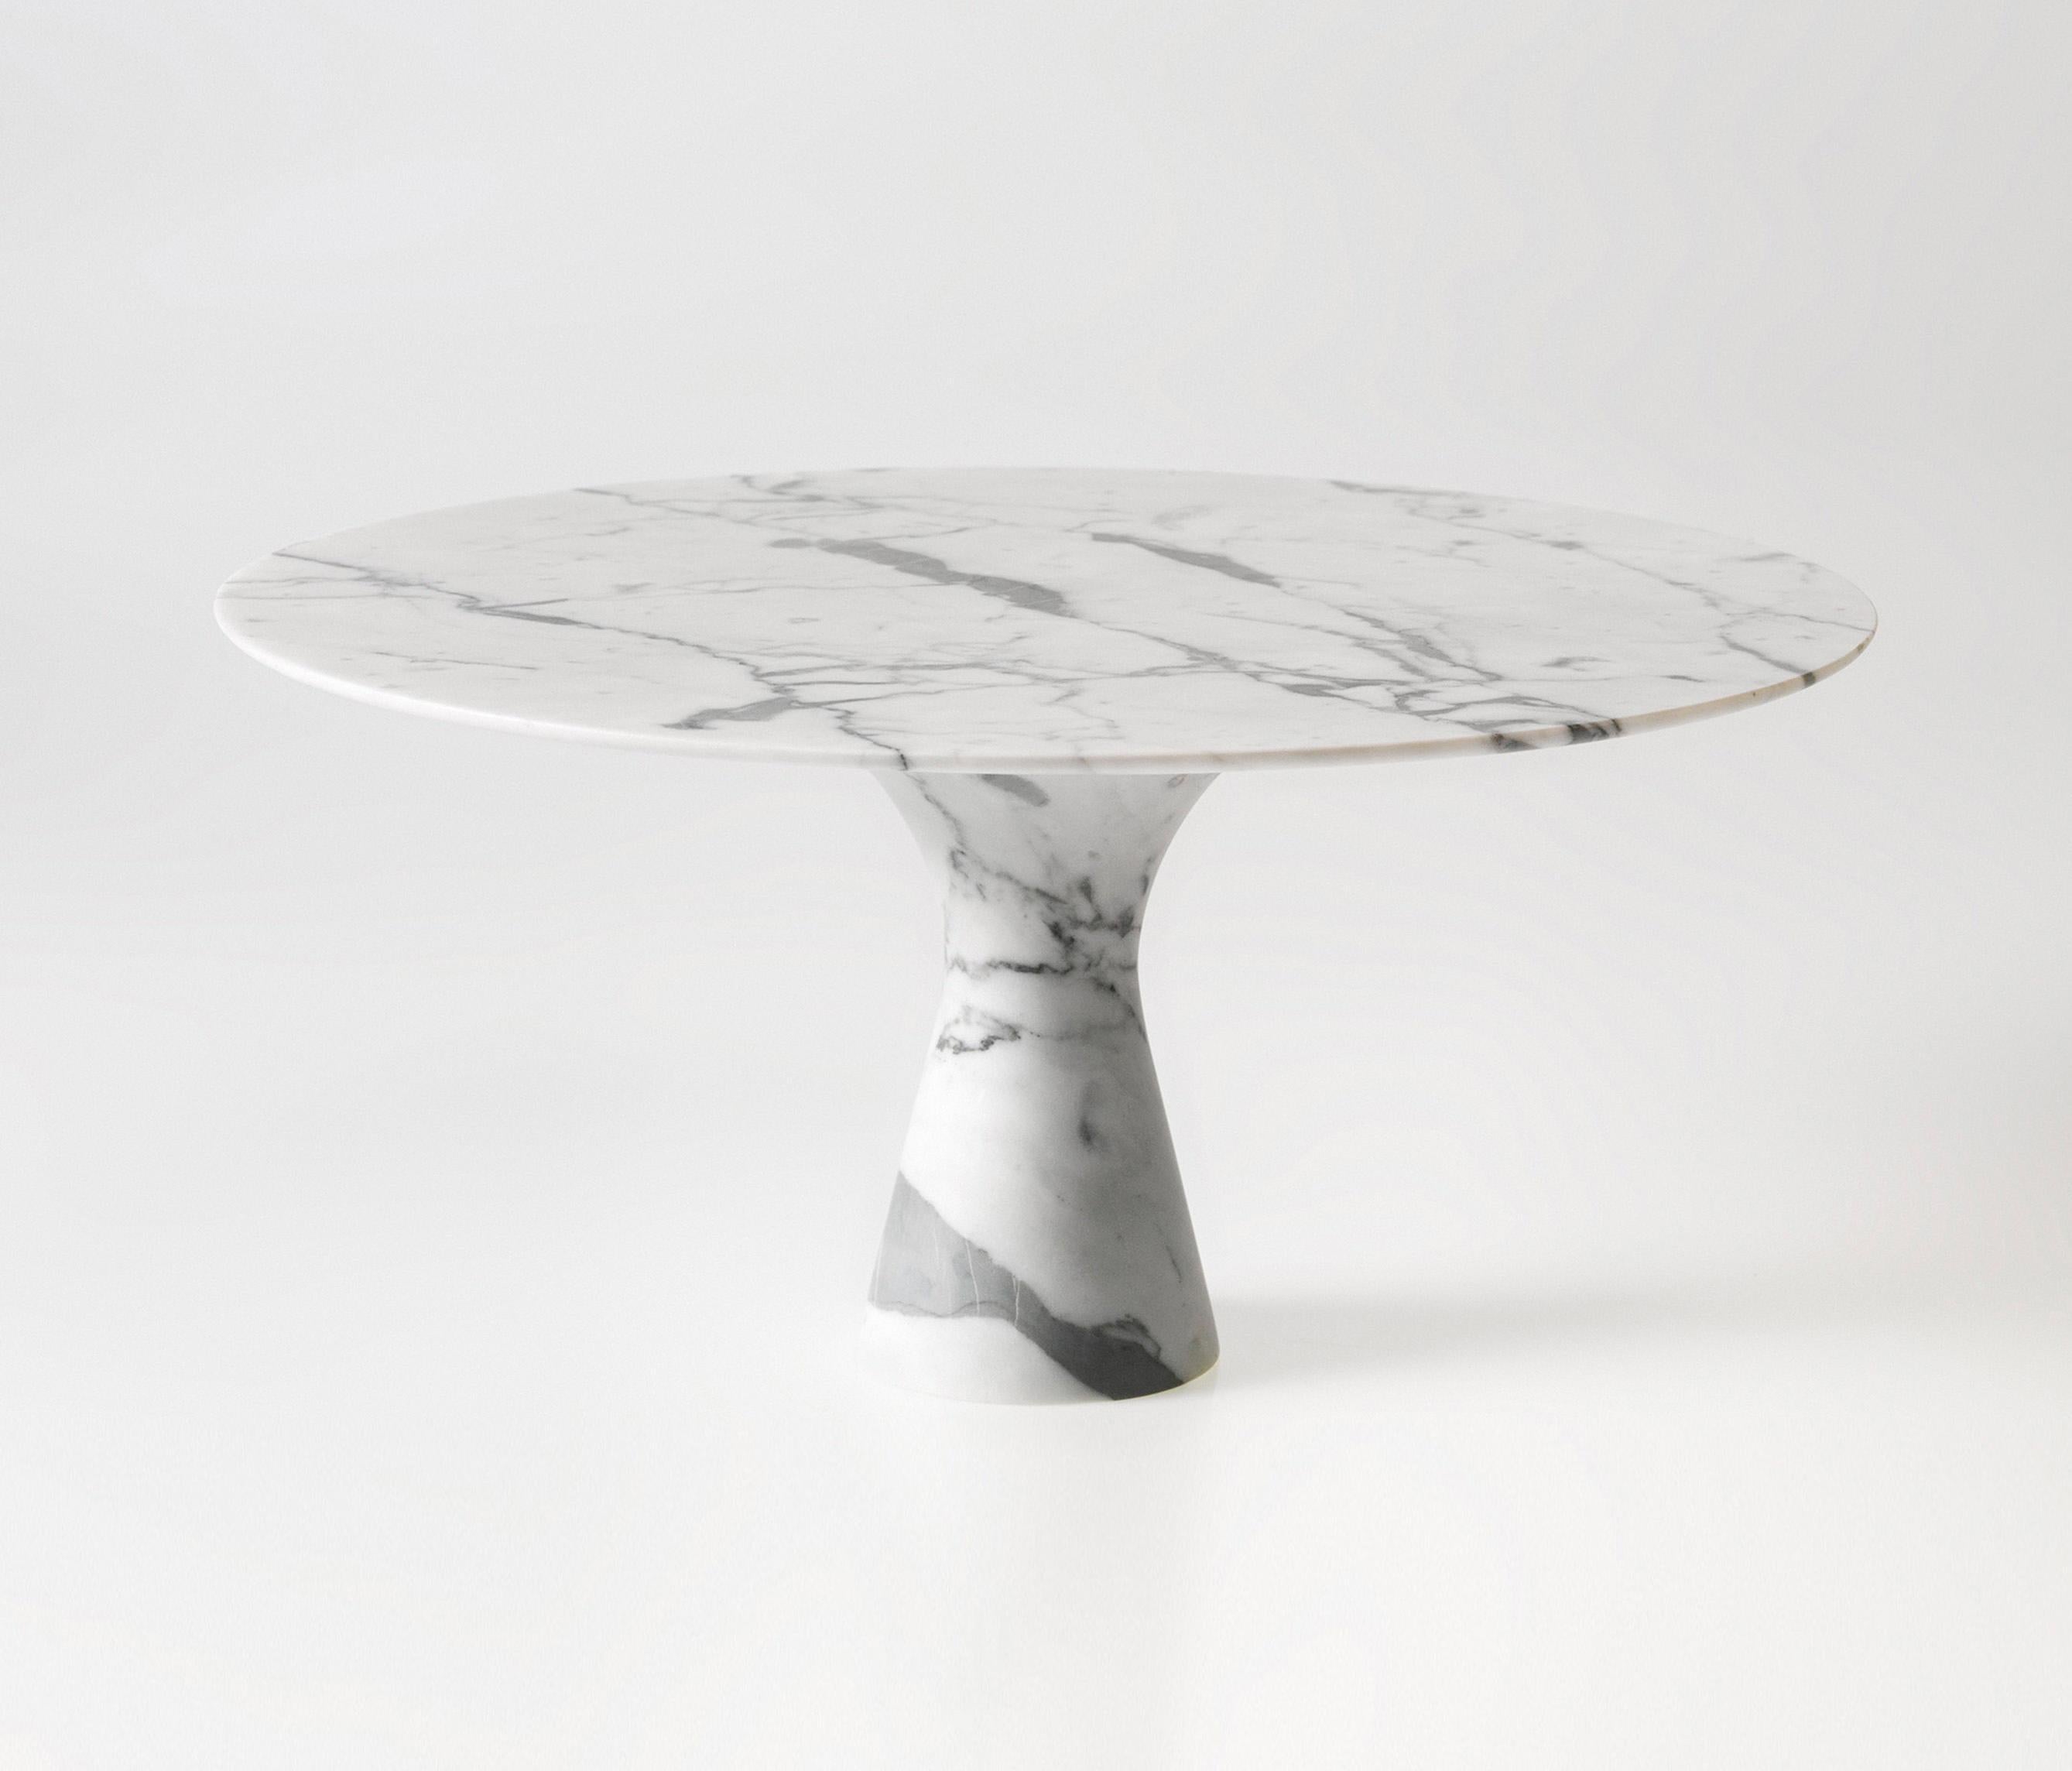 Bianco Statuarietto Refined Contemporary Marble Low Round Table 36/100
Dimensions: 100 x H 36 cm
Materials: Bianco Statuarietto
Available in Kyknos, Grafite, Travertino Rosso, Grey Saint Laurent, Picasso green, Port Saint Laurent, Travertino Silver,